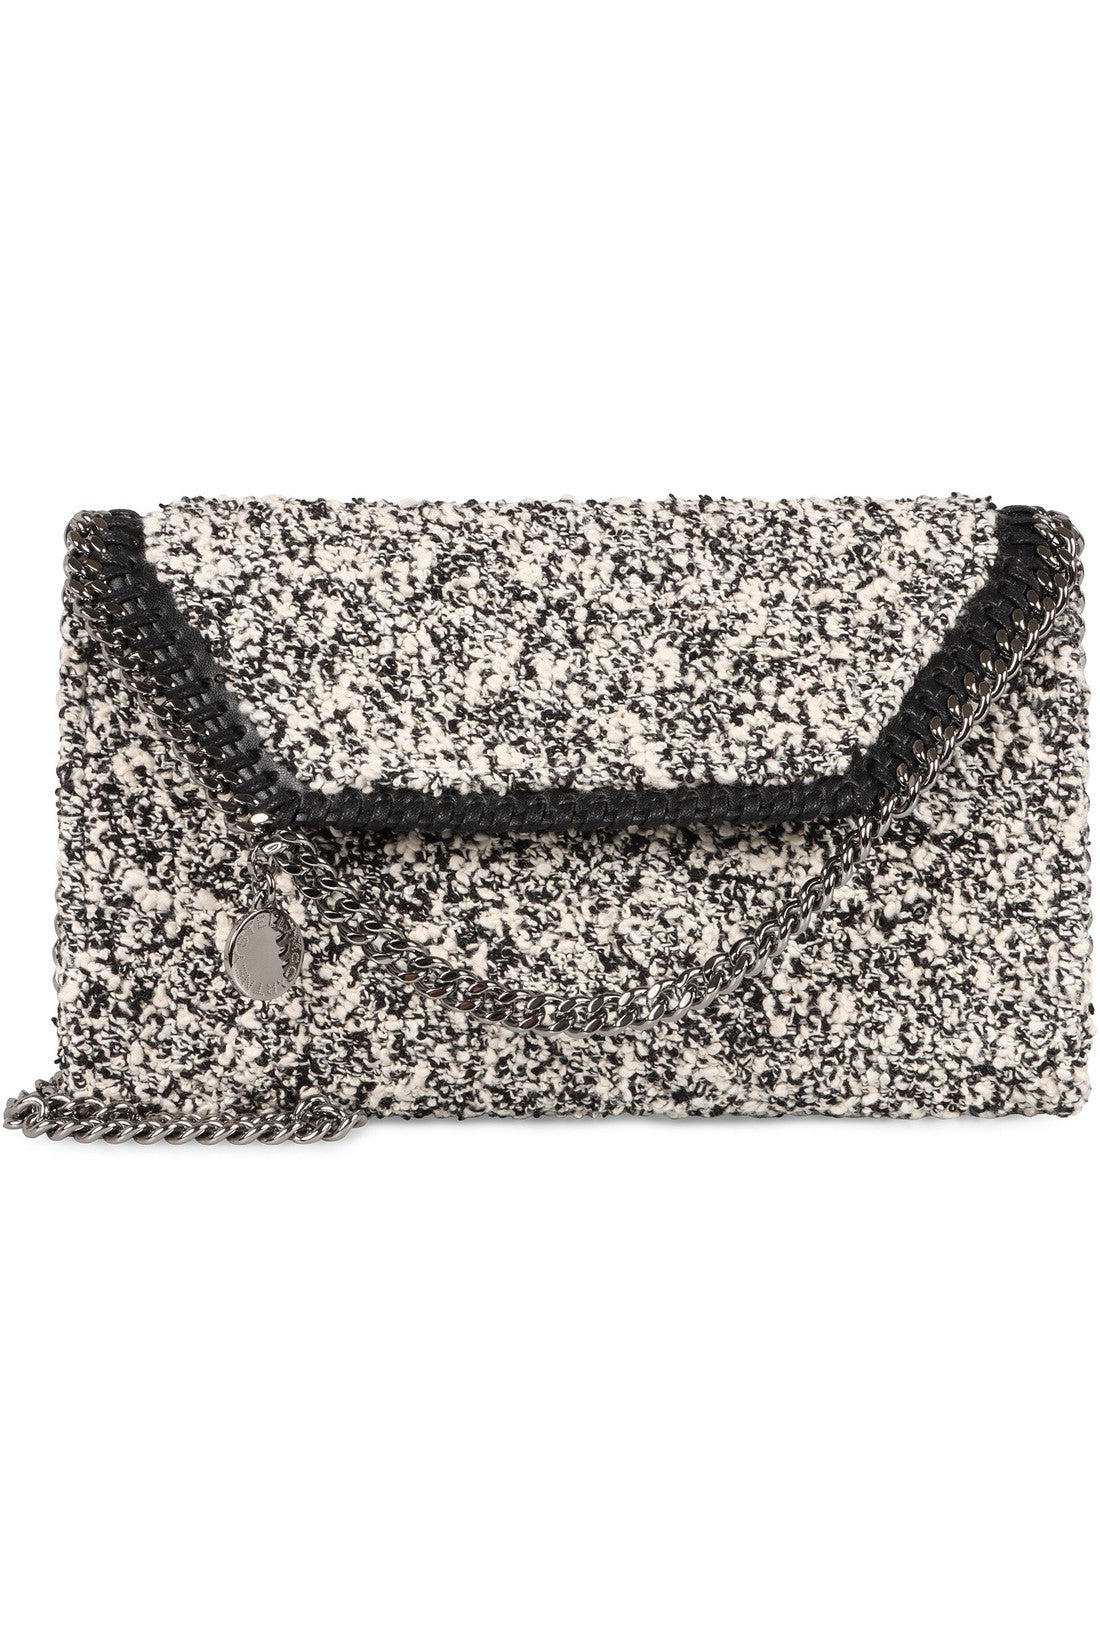 Stella McCartney-OUTLET-SALE-Falabella knitted crossbody bag-ARCHIVIST